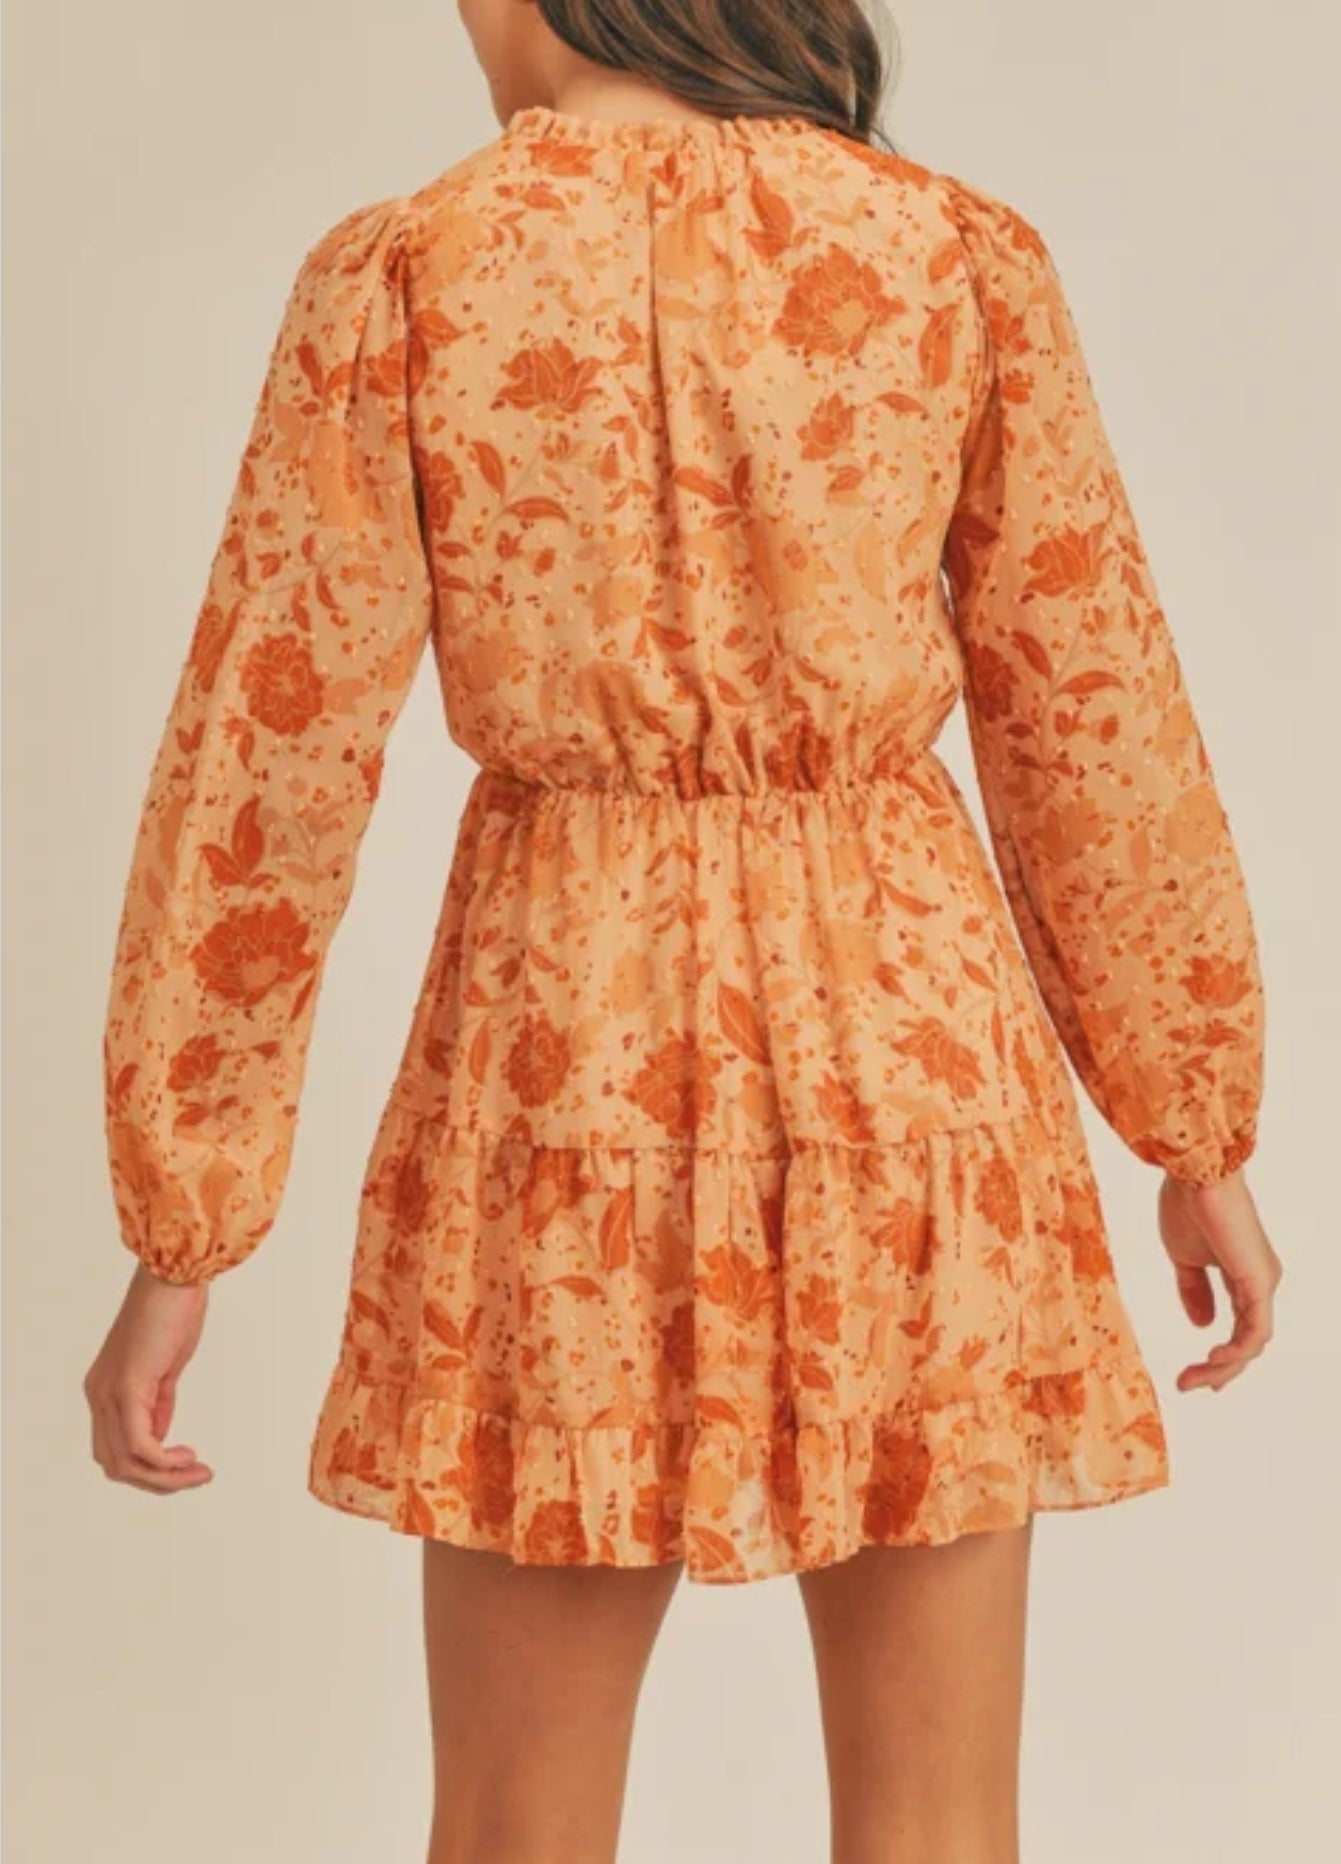 Apricot Taupe Floral Dress